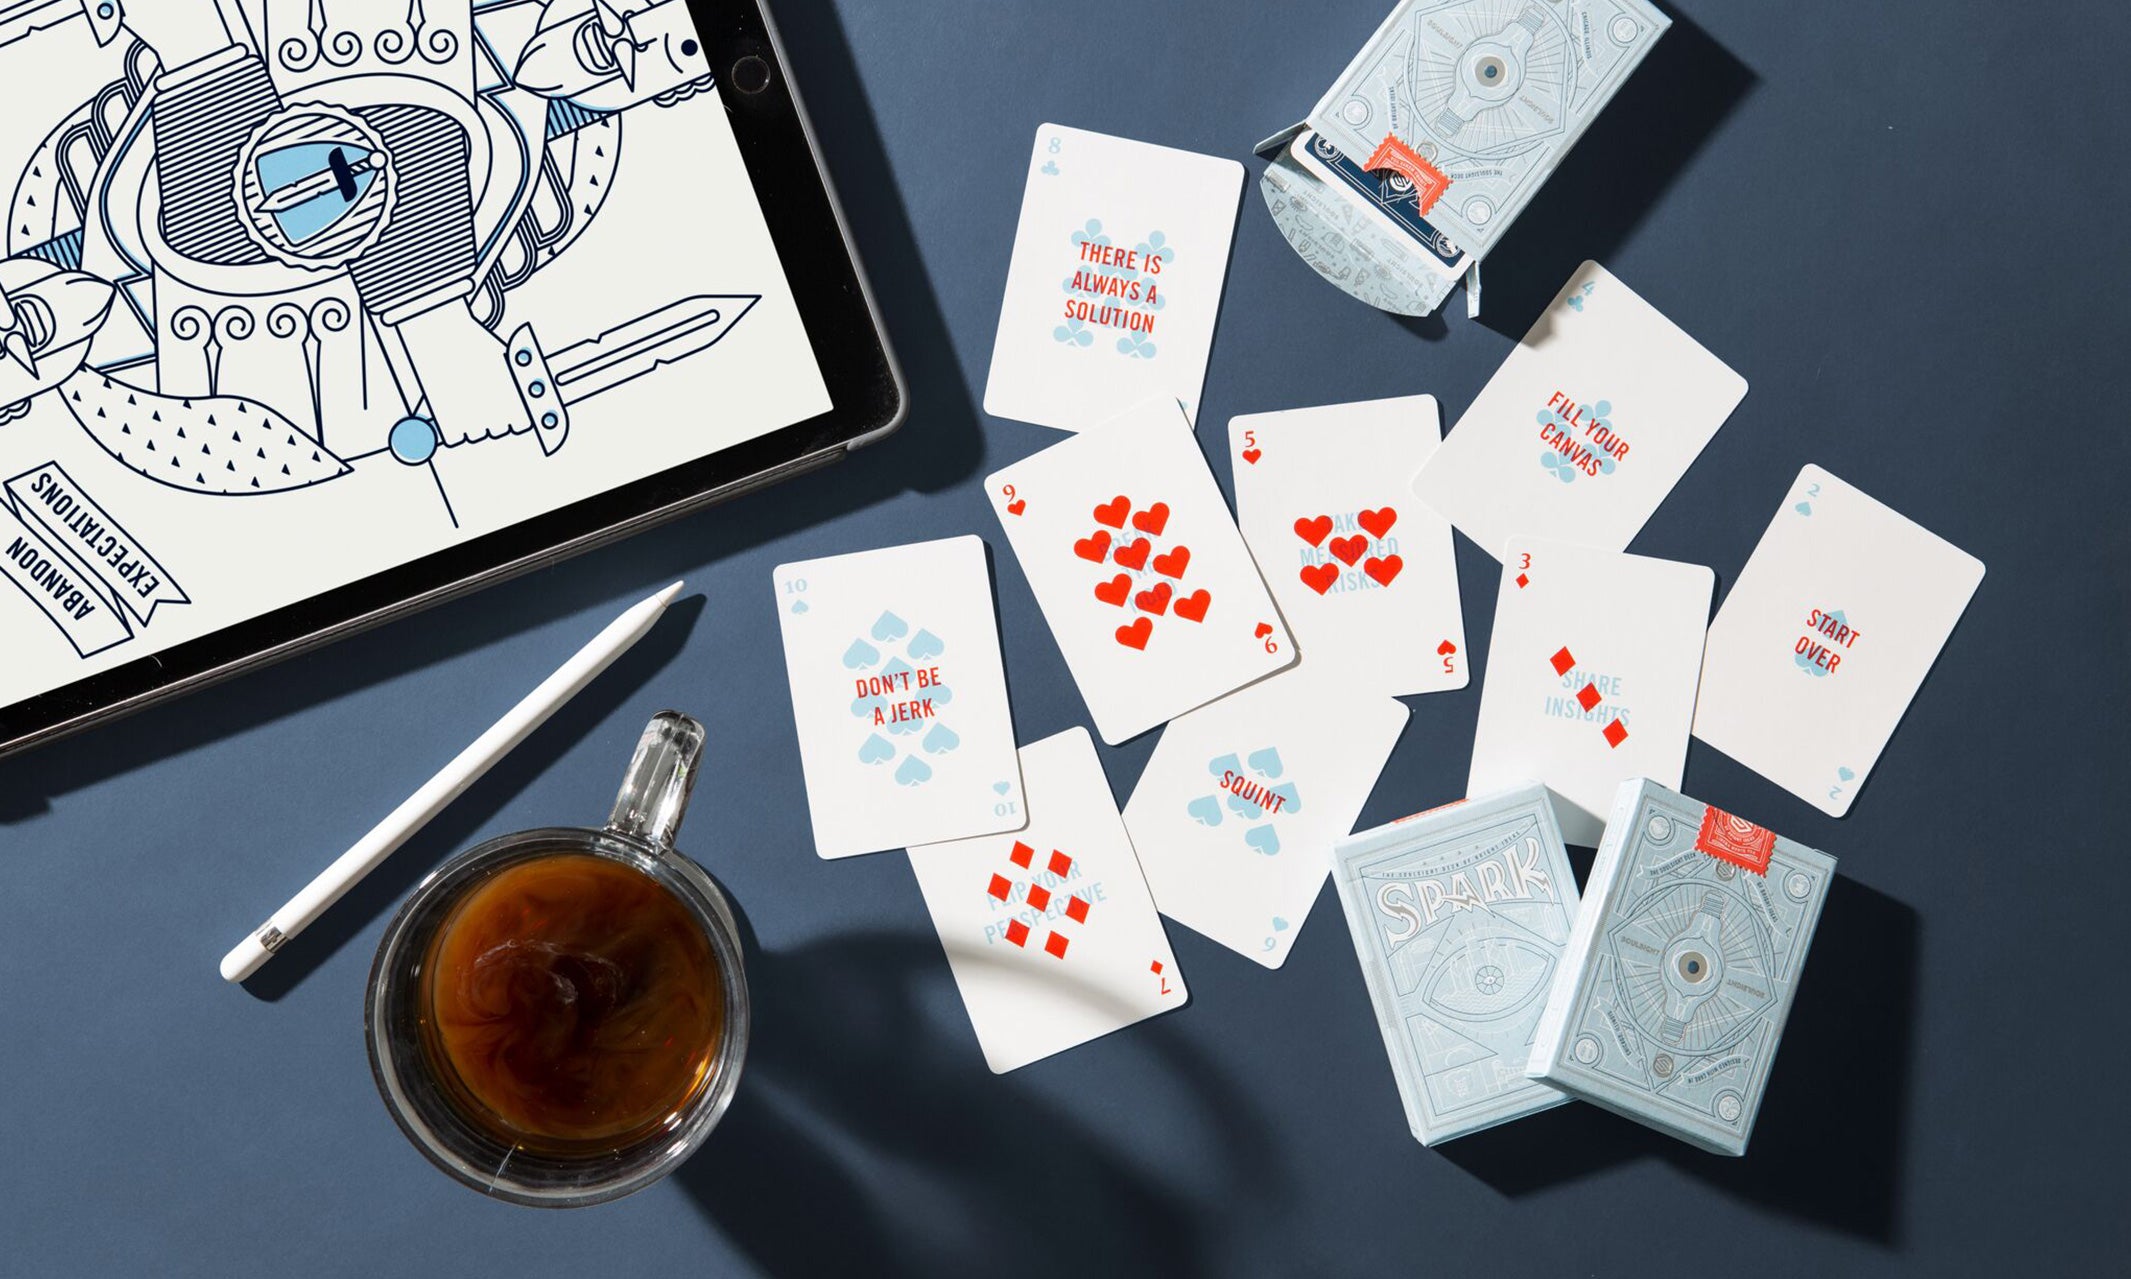 Spark Playing Cards